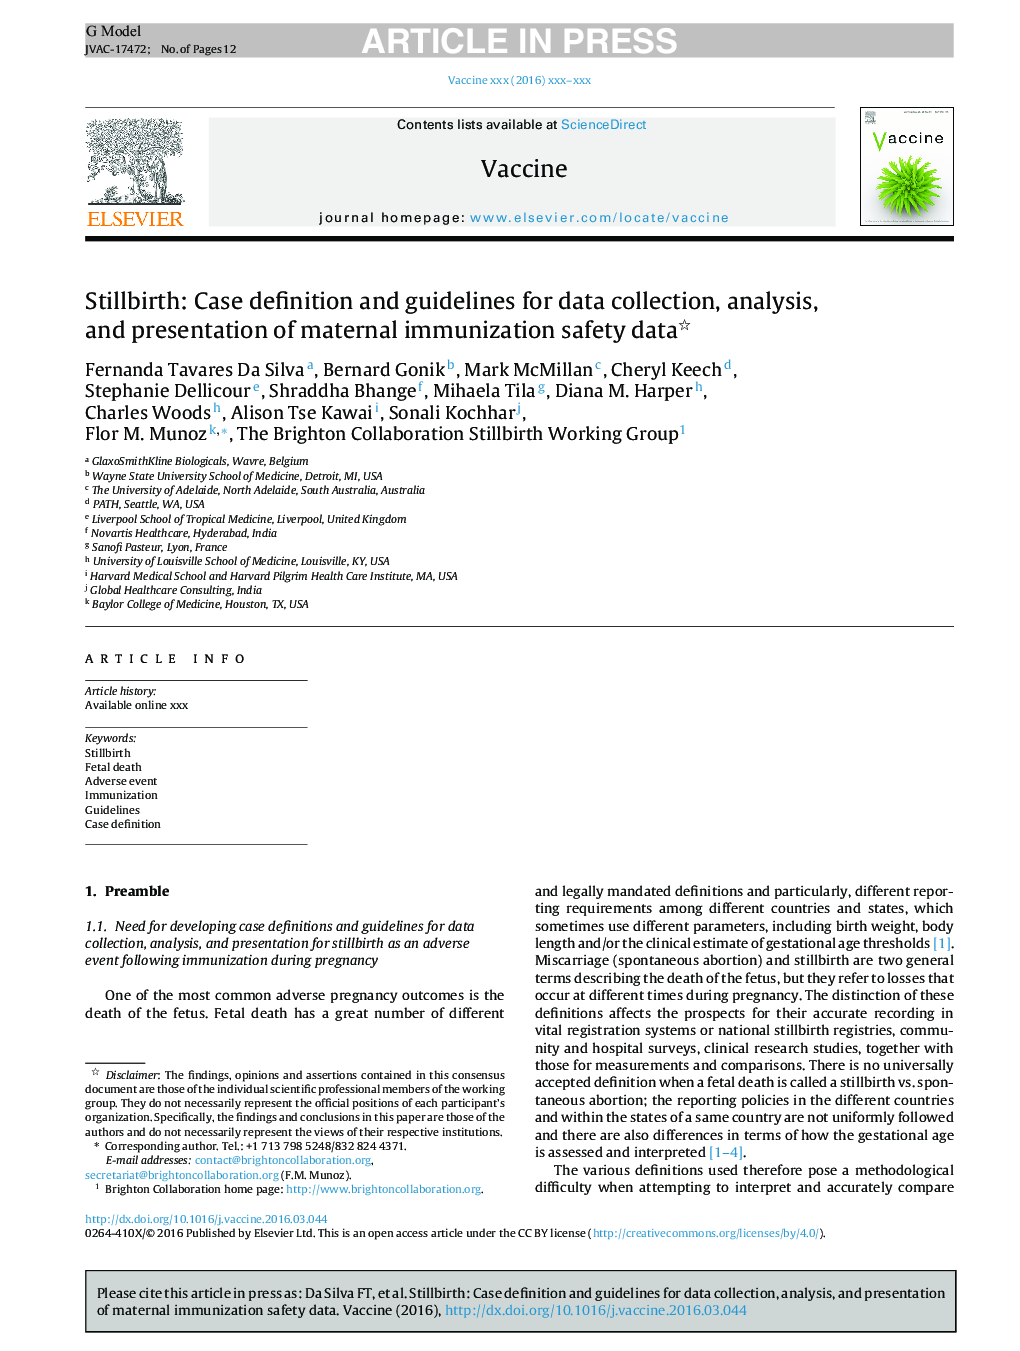 Stillbirth: Case definition and guidelines for data collection, analysis, and presentation of maternal immunization safety data